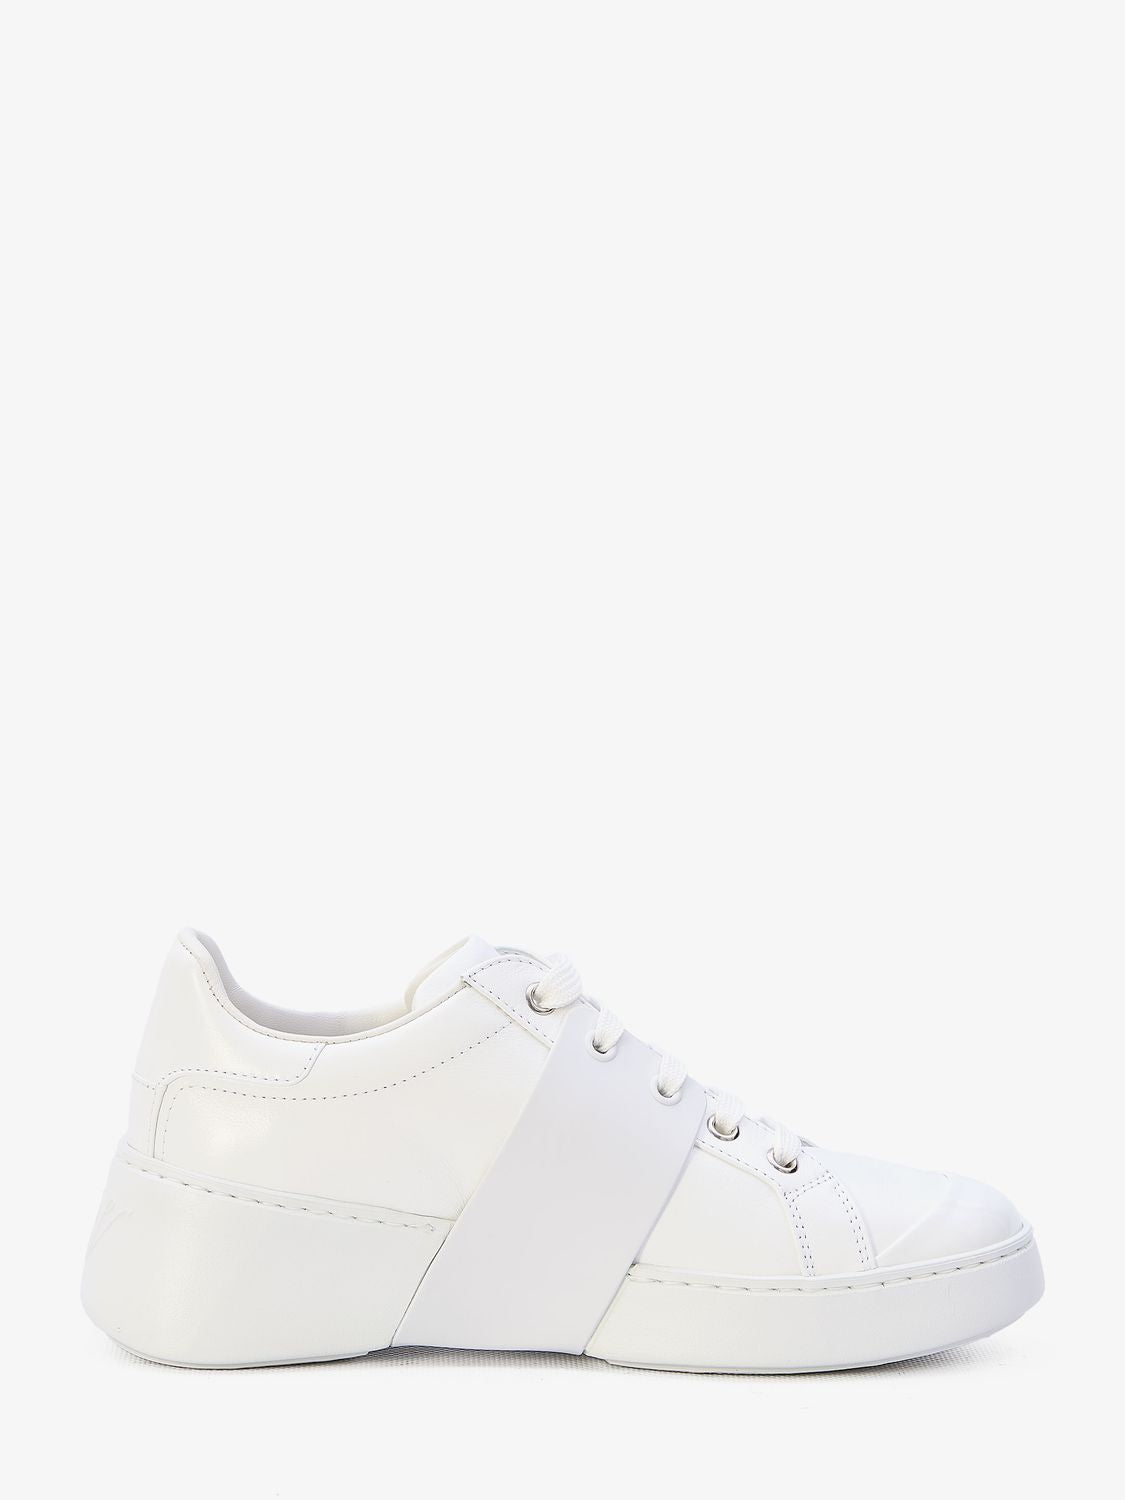 ROGER VIVIER White Leather Sneakers with Square Metal Buckle for Women